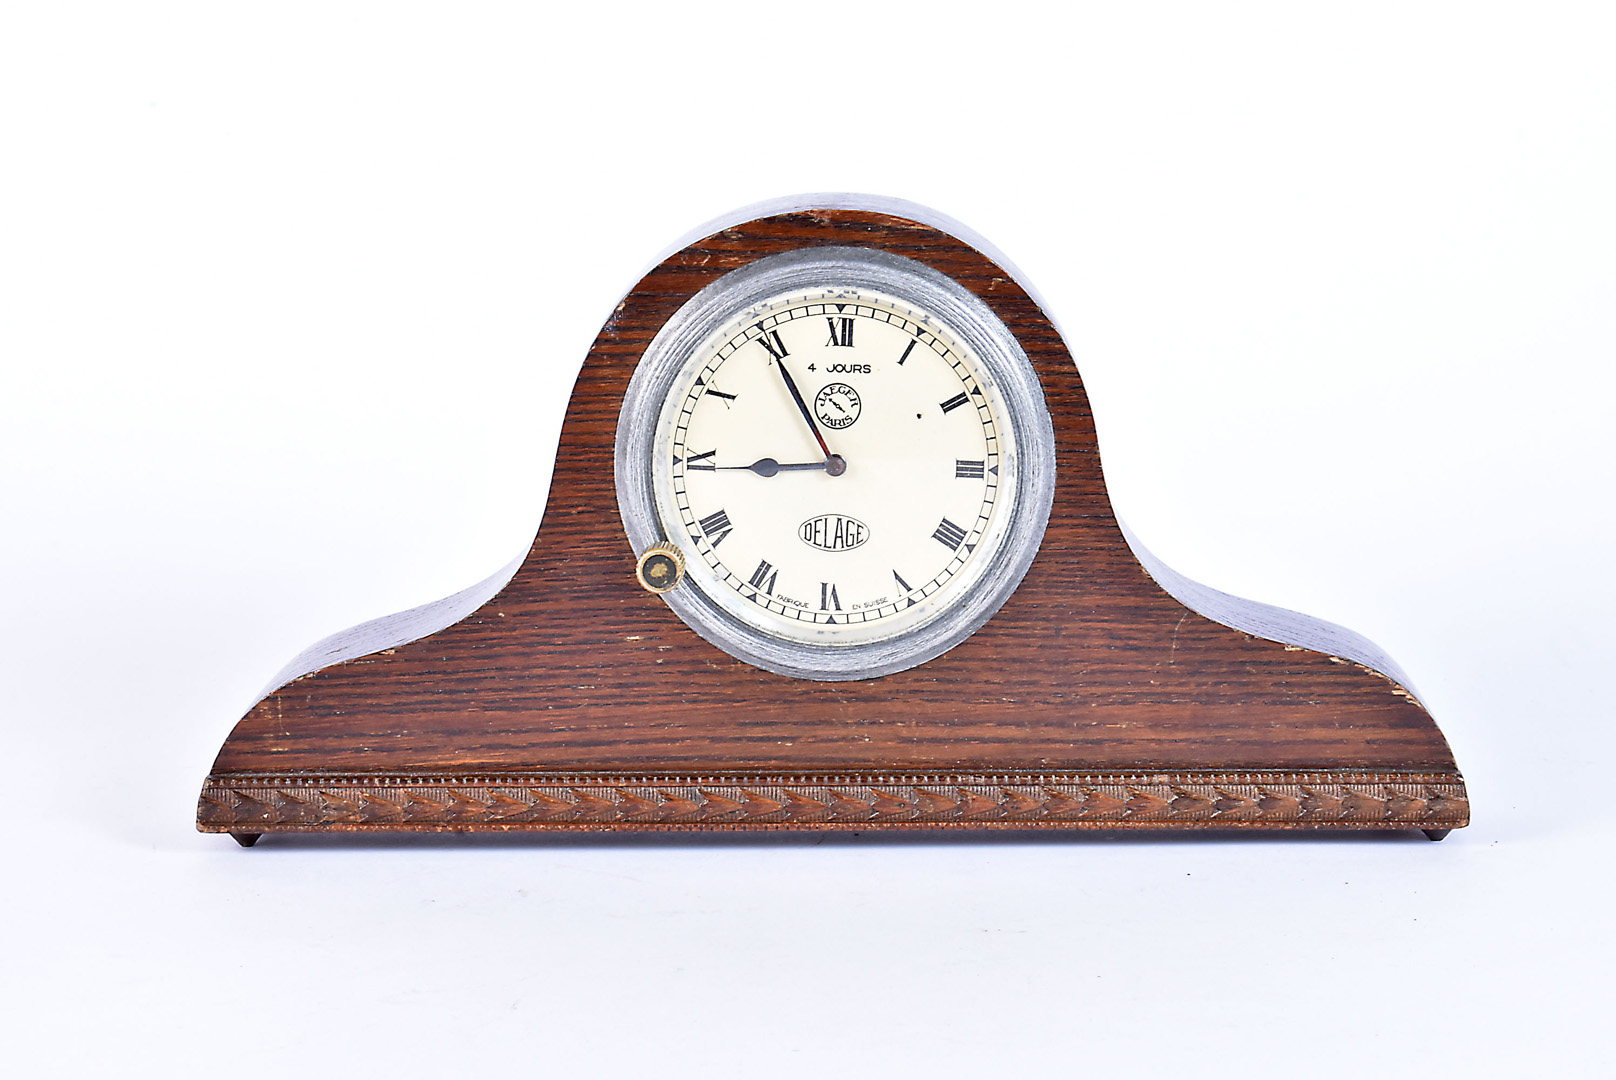 A Delage Jaeger dashboard clock, having black Roman numerals on cream dial, 4 hour movement, mounted